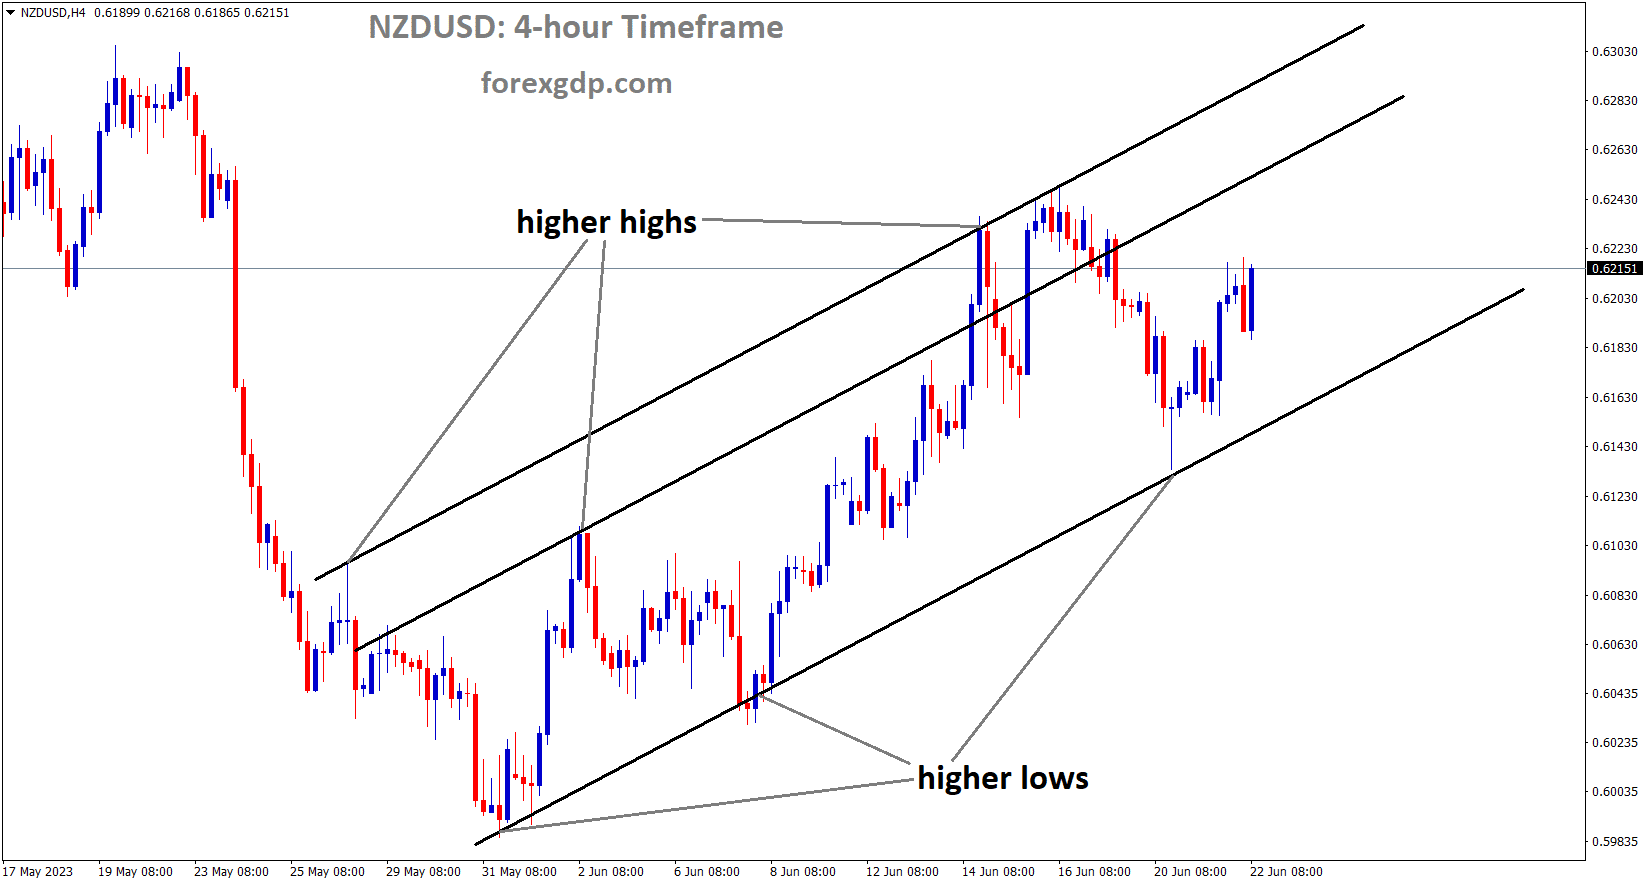 NZDUSD is moving in an Ascending channel and the market has rebounded from the higher low area of the channel 1